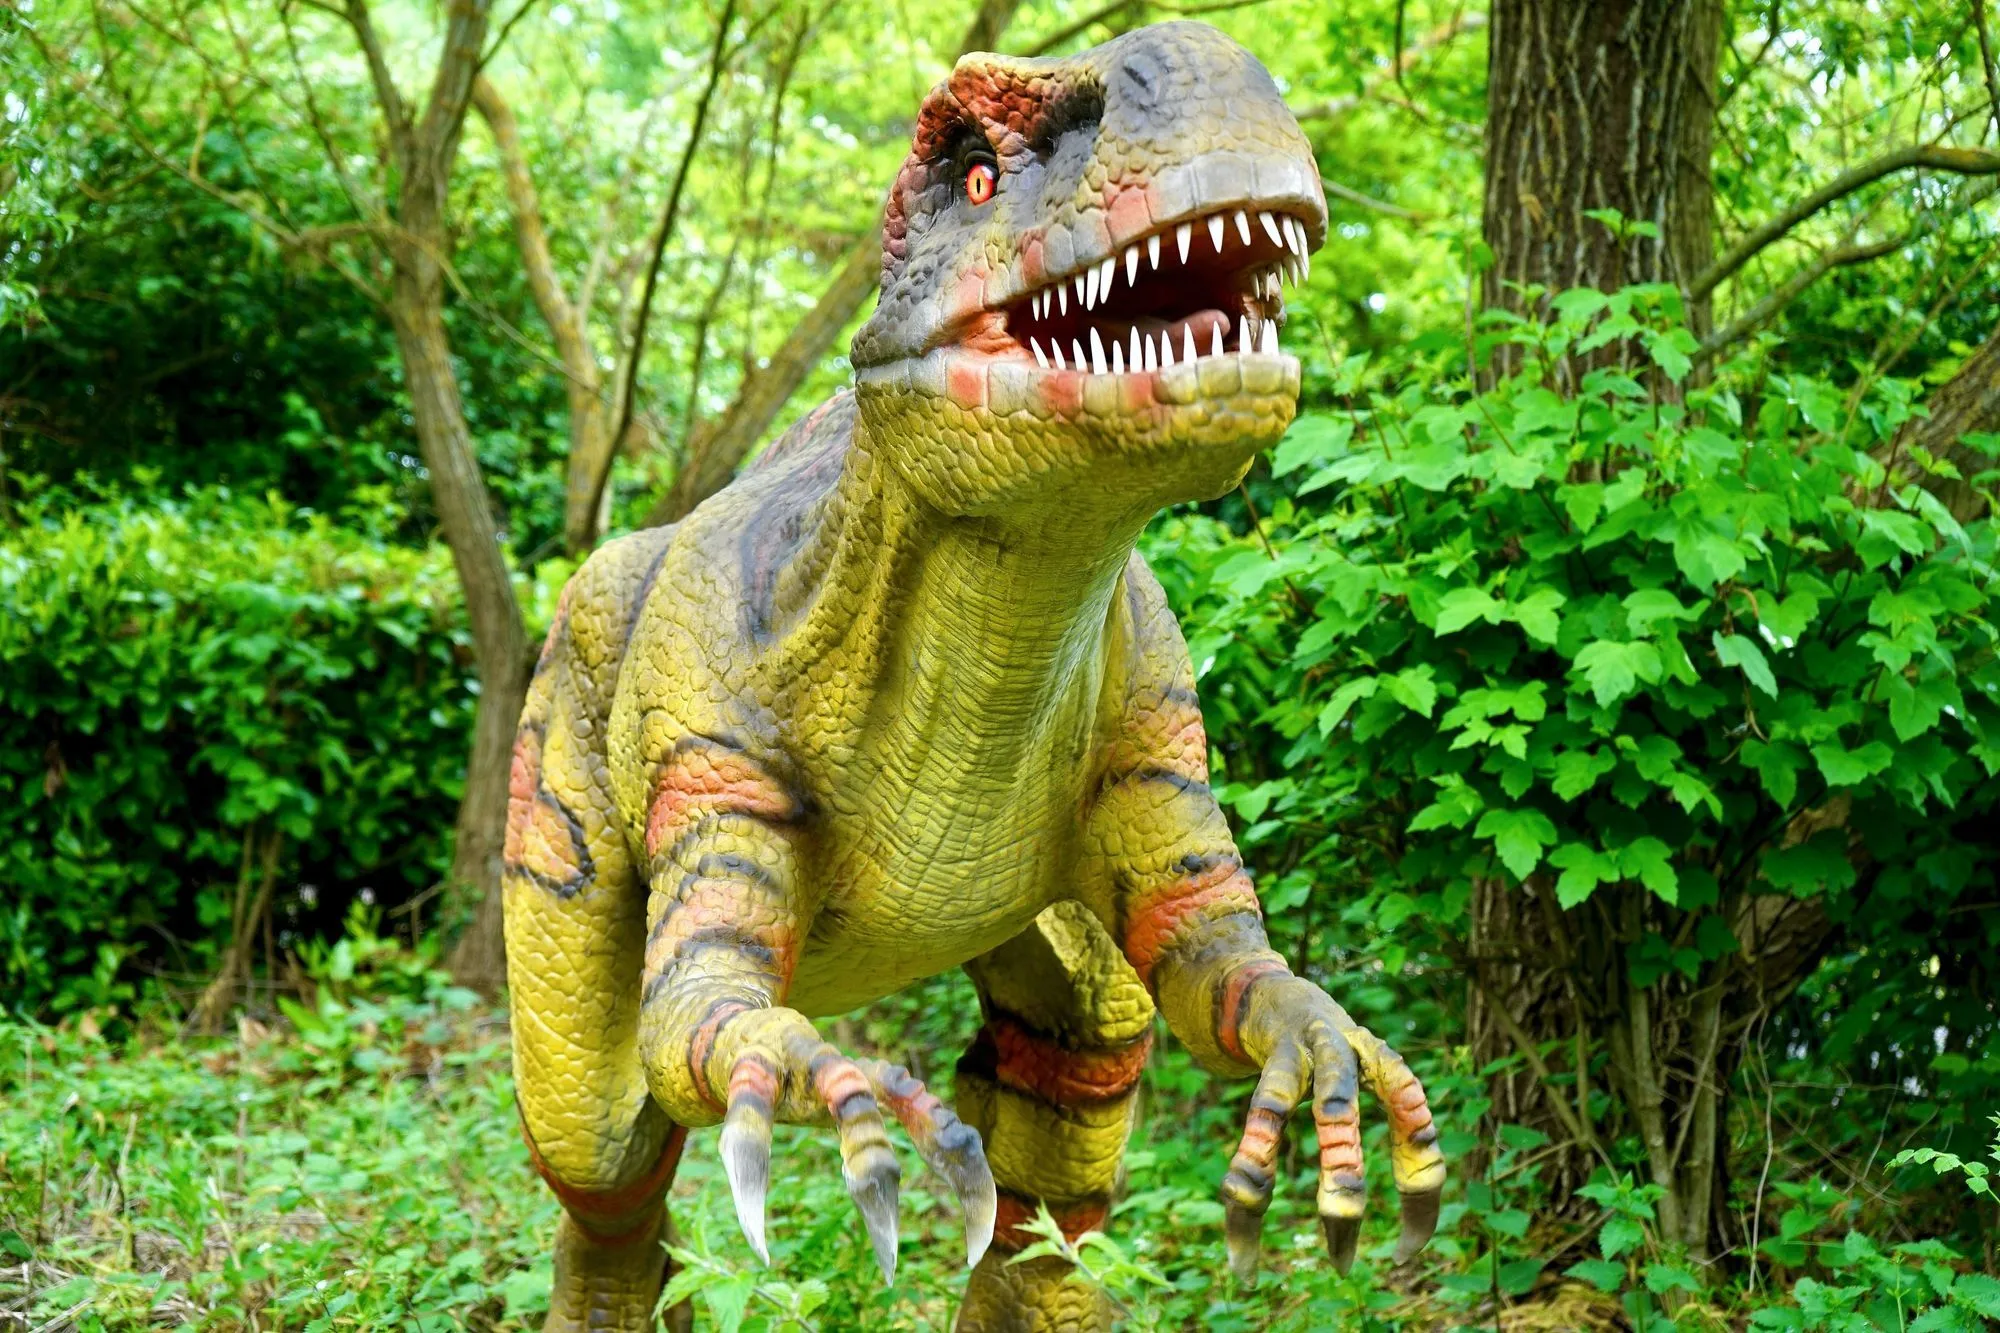 The gigantic dinosaur is breath-catching! Learn more about the fastest dinosaur here.